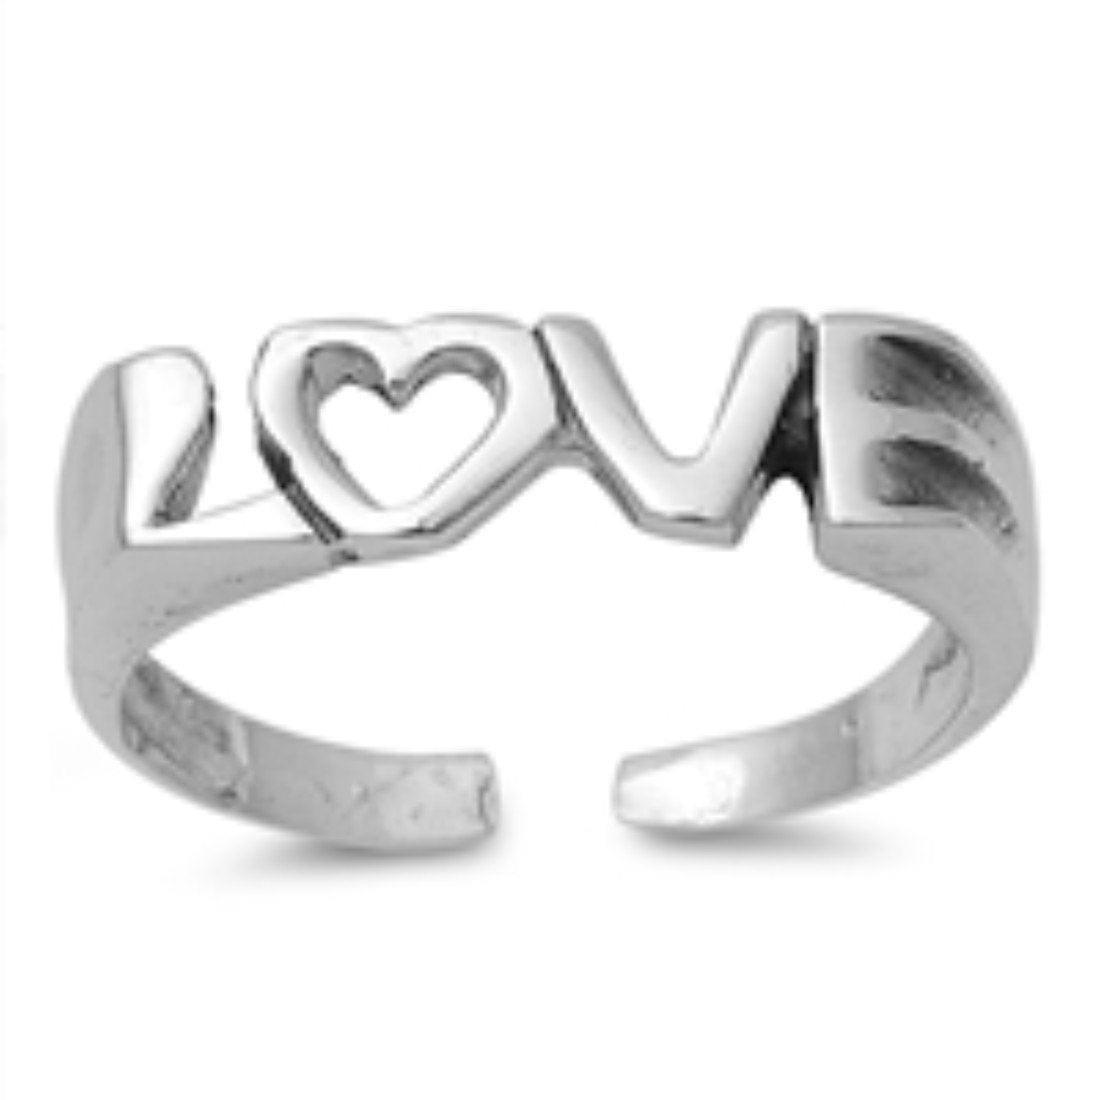 Adjustable Love Silver Toe Ring Band 925 Sterling Silver (5mm)